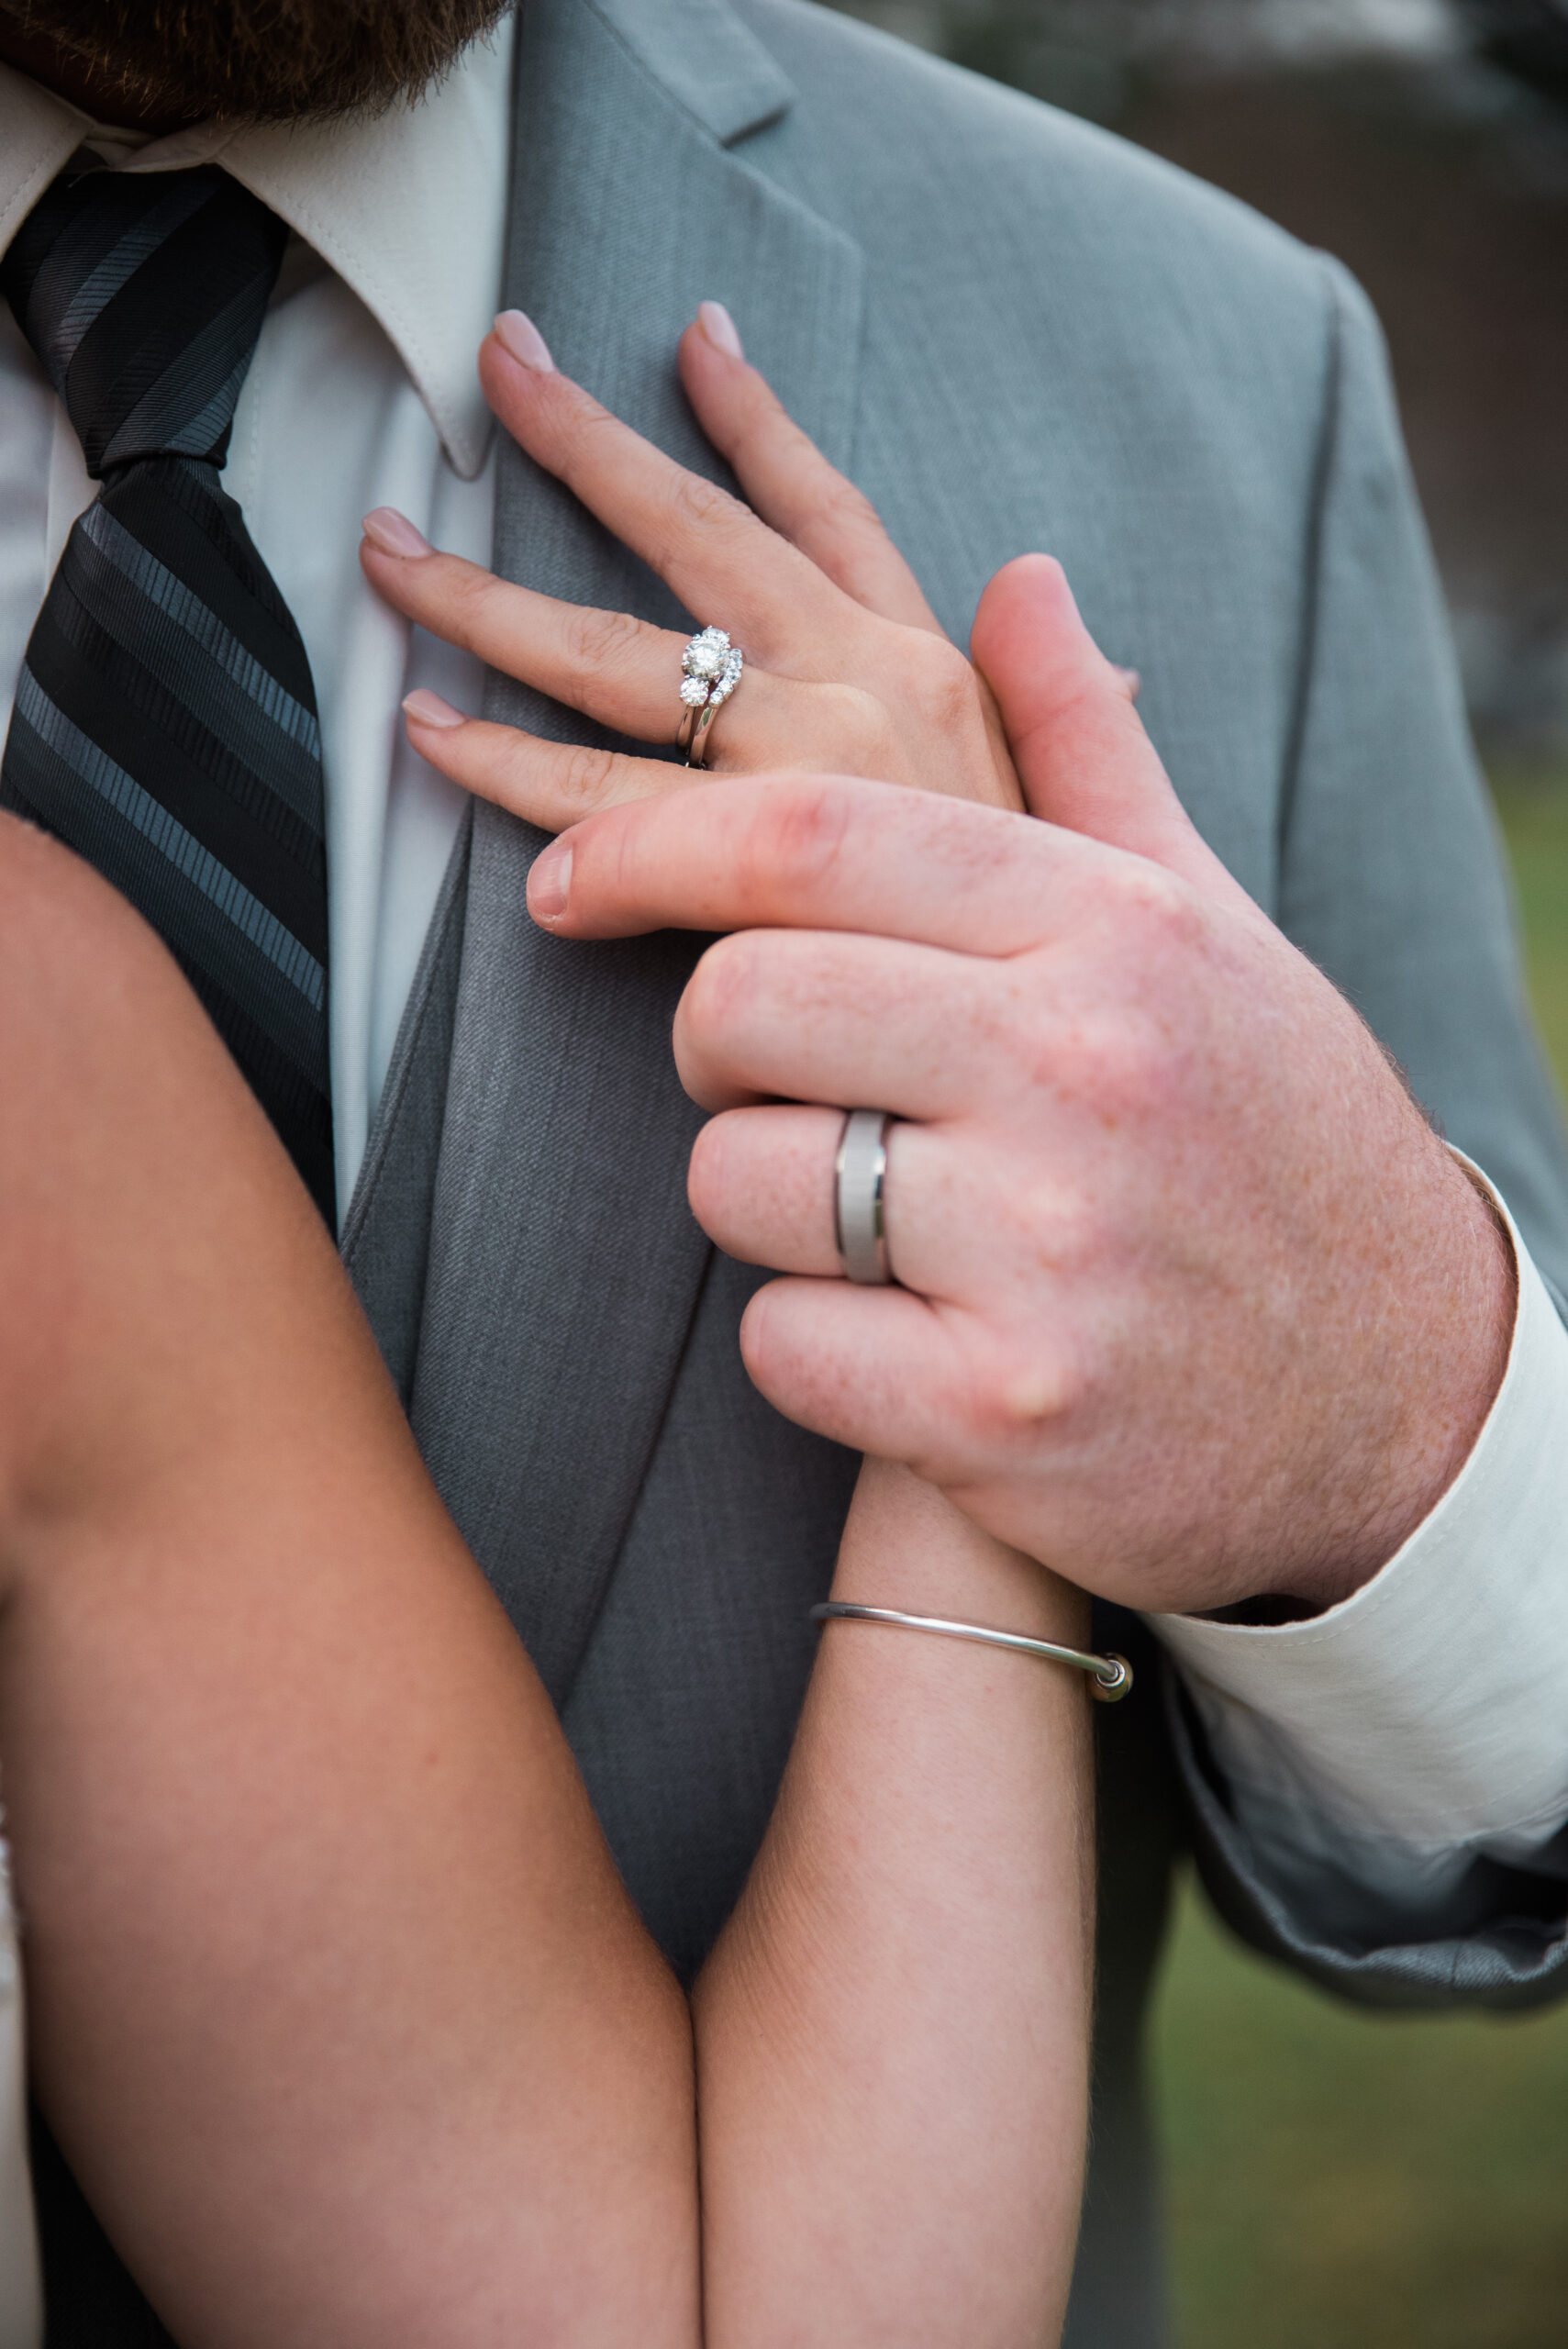 rings on the hands of a new bride and groom the conner center wedding